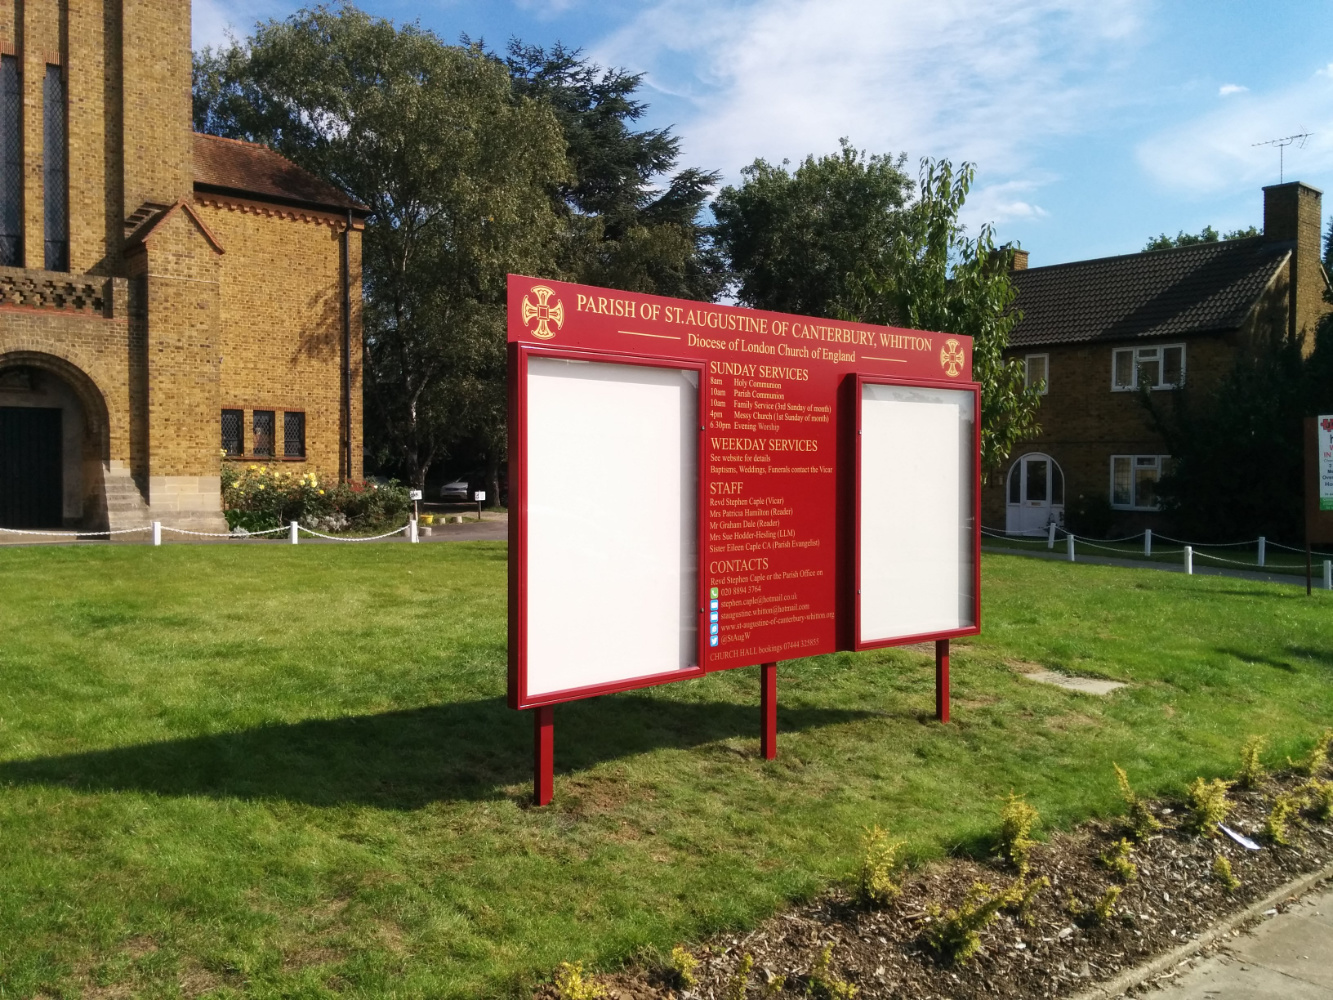 Large church notice board in front of church on a grass verge